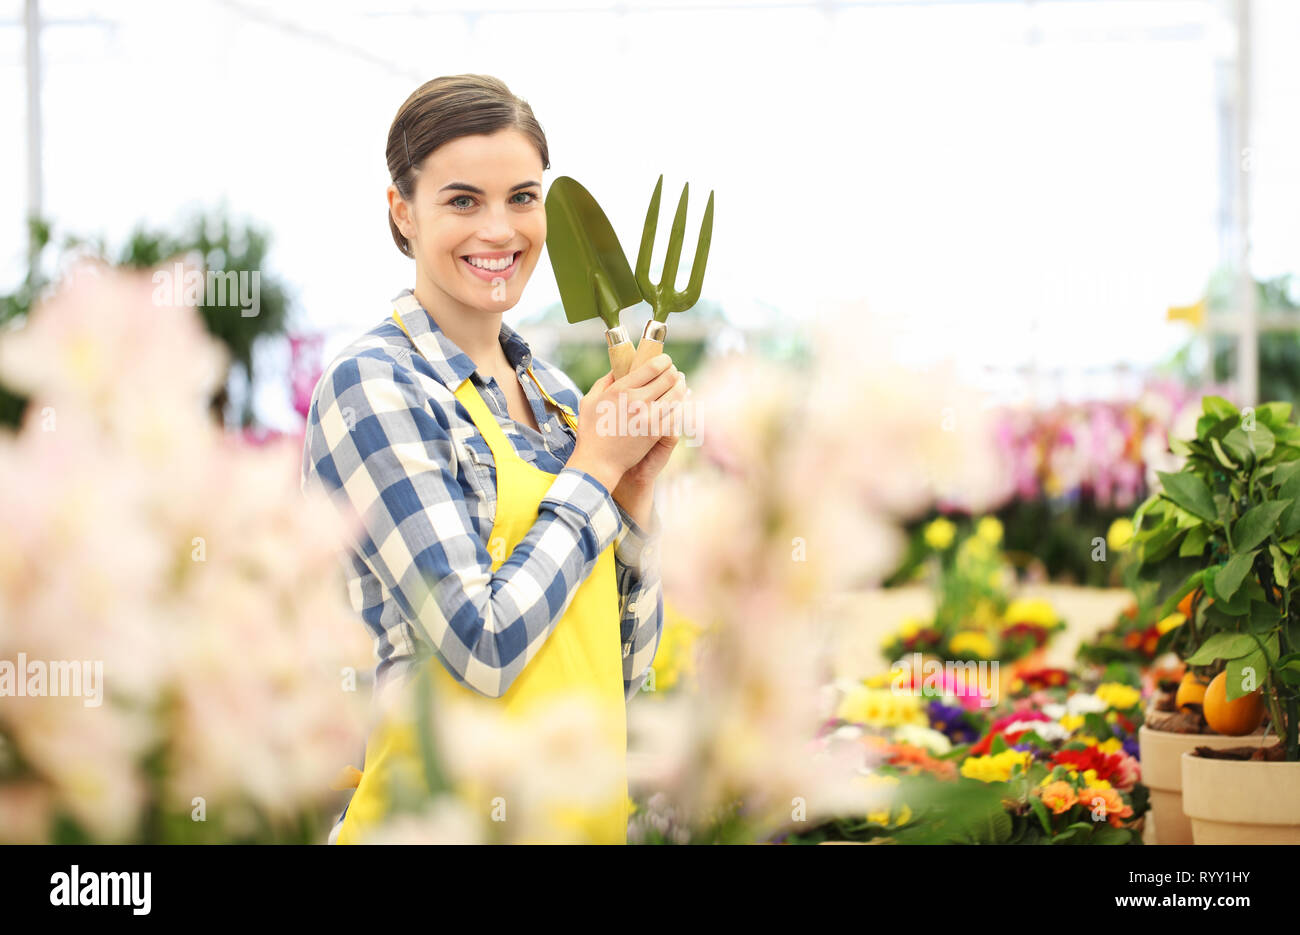 smiling woman in garden of flowers with garden tools, spring concept Stock Photo